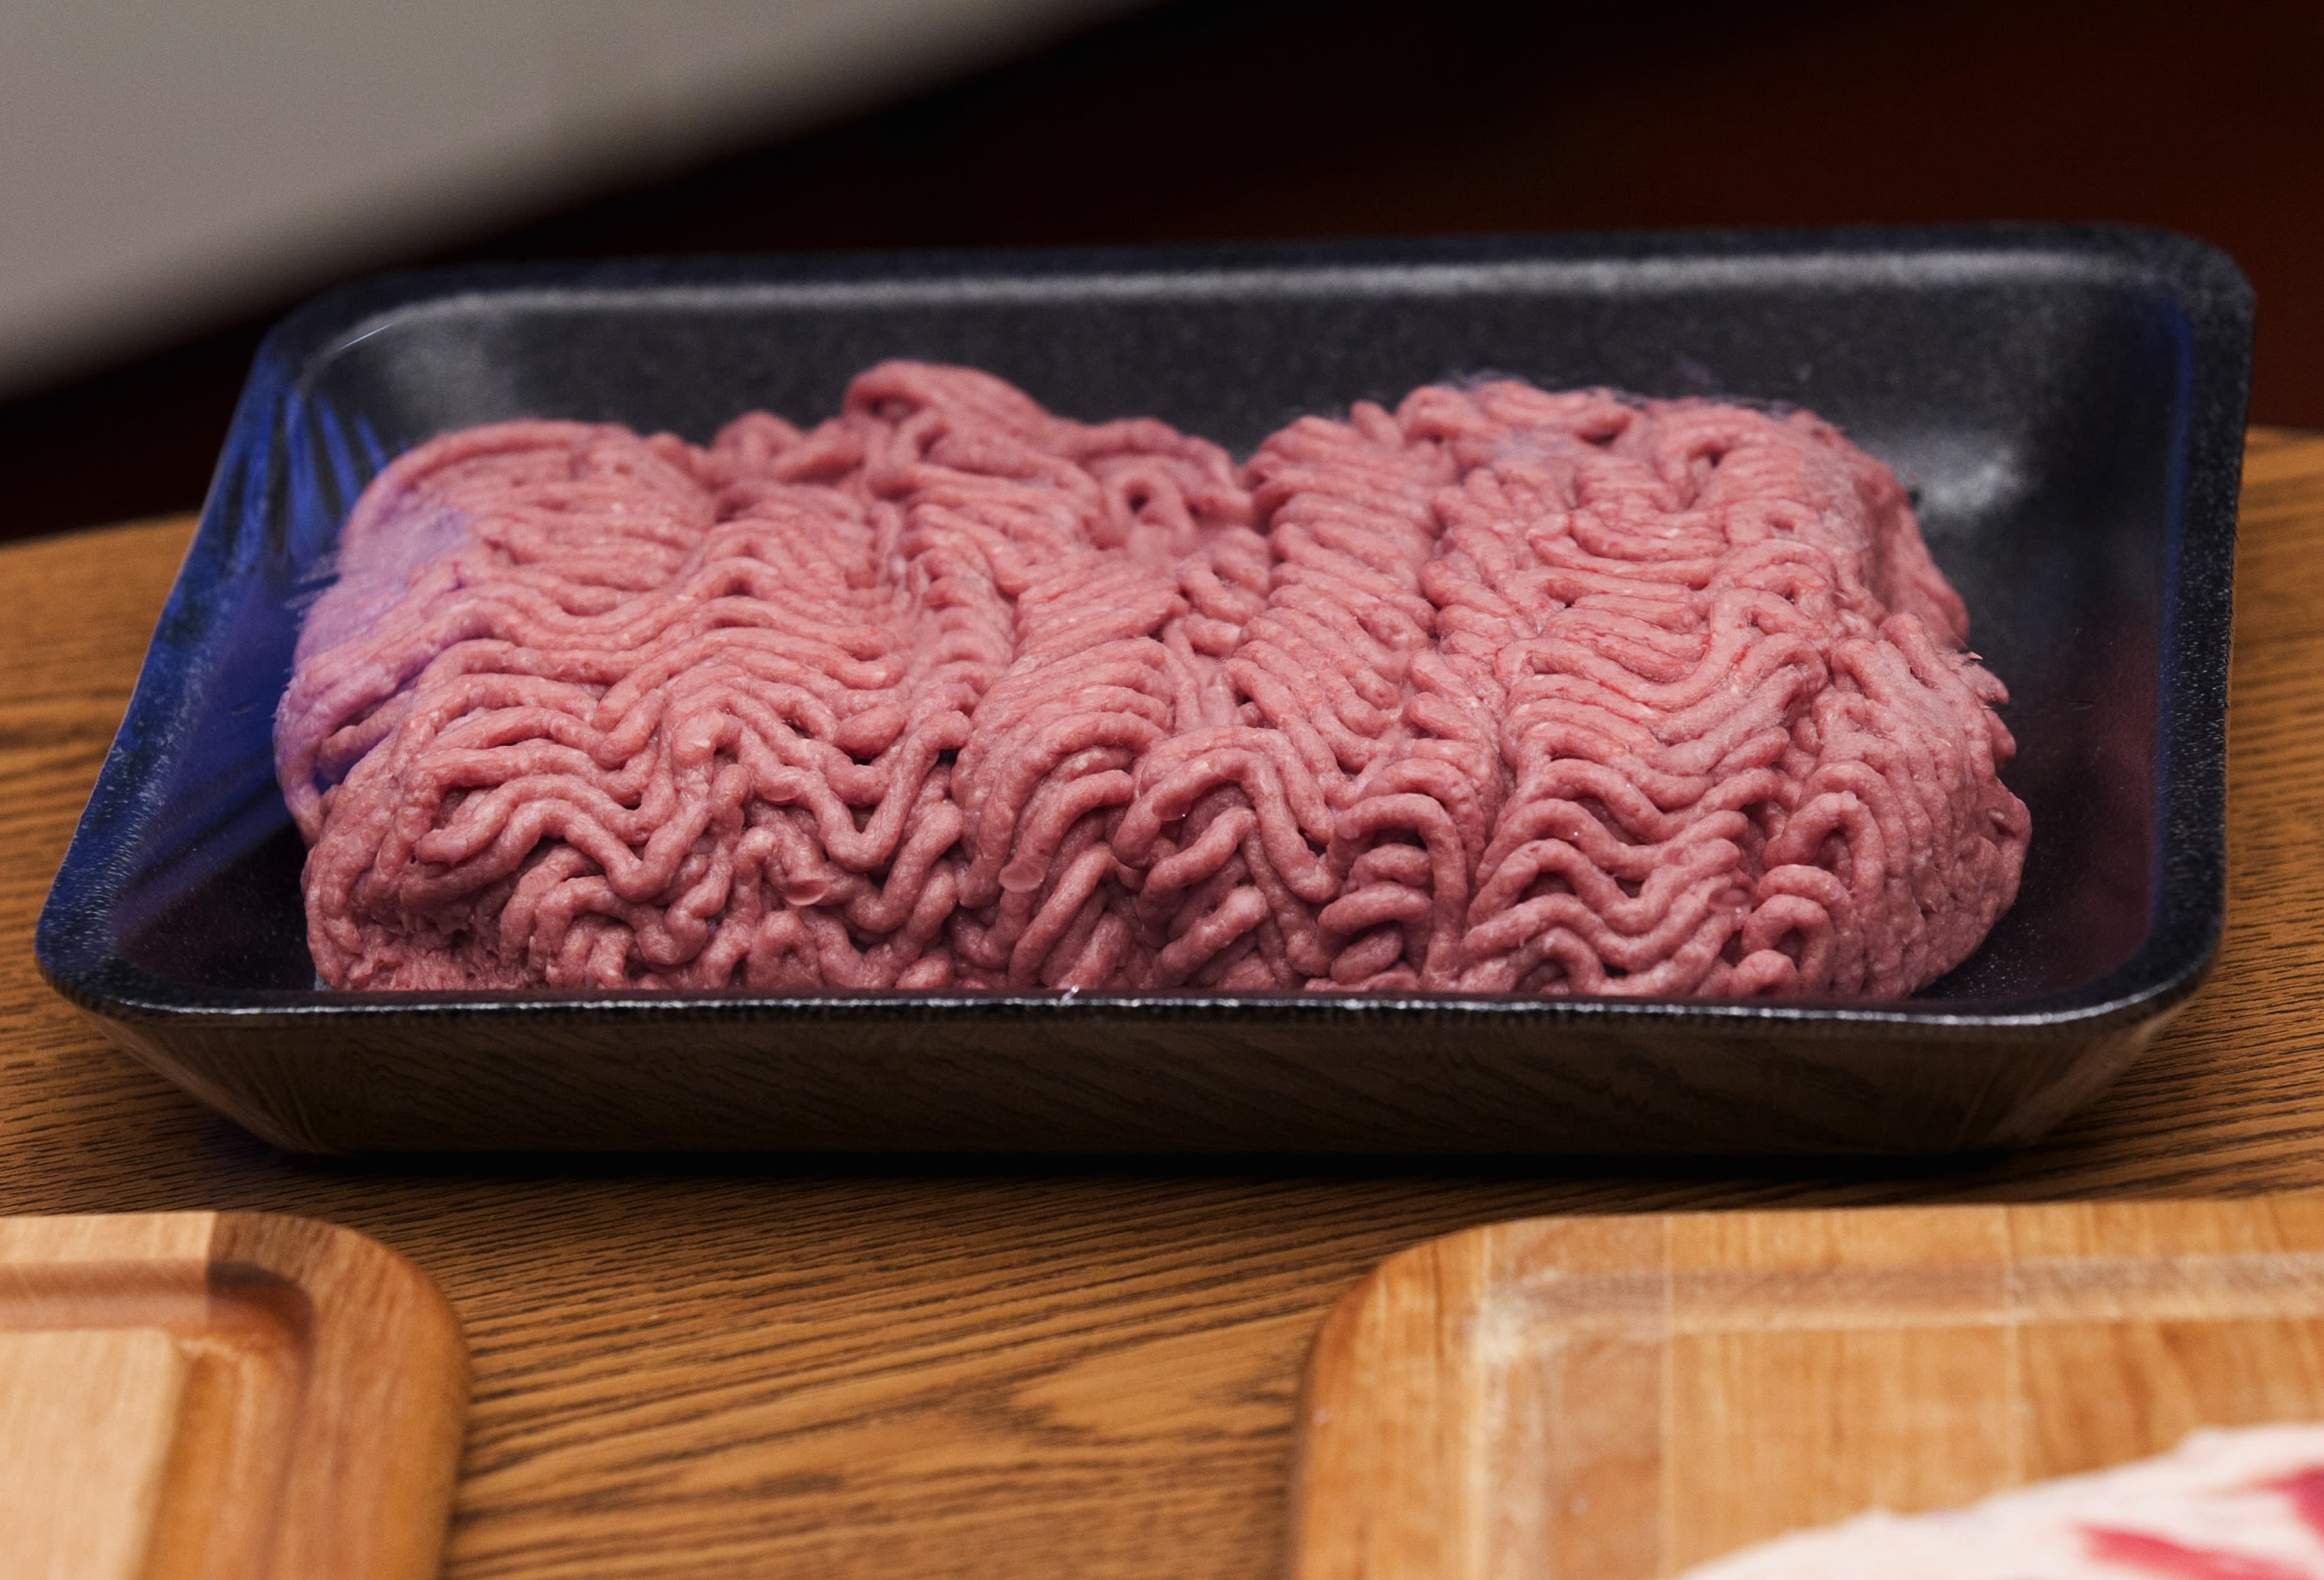 News watchdogs alarmed by proliferation of ‘pink slime’ sites in San Diego and elsewhere